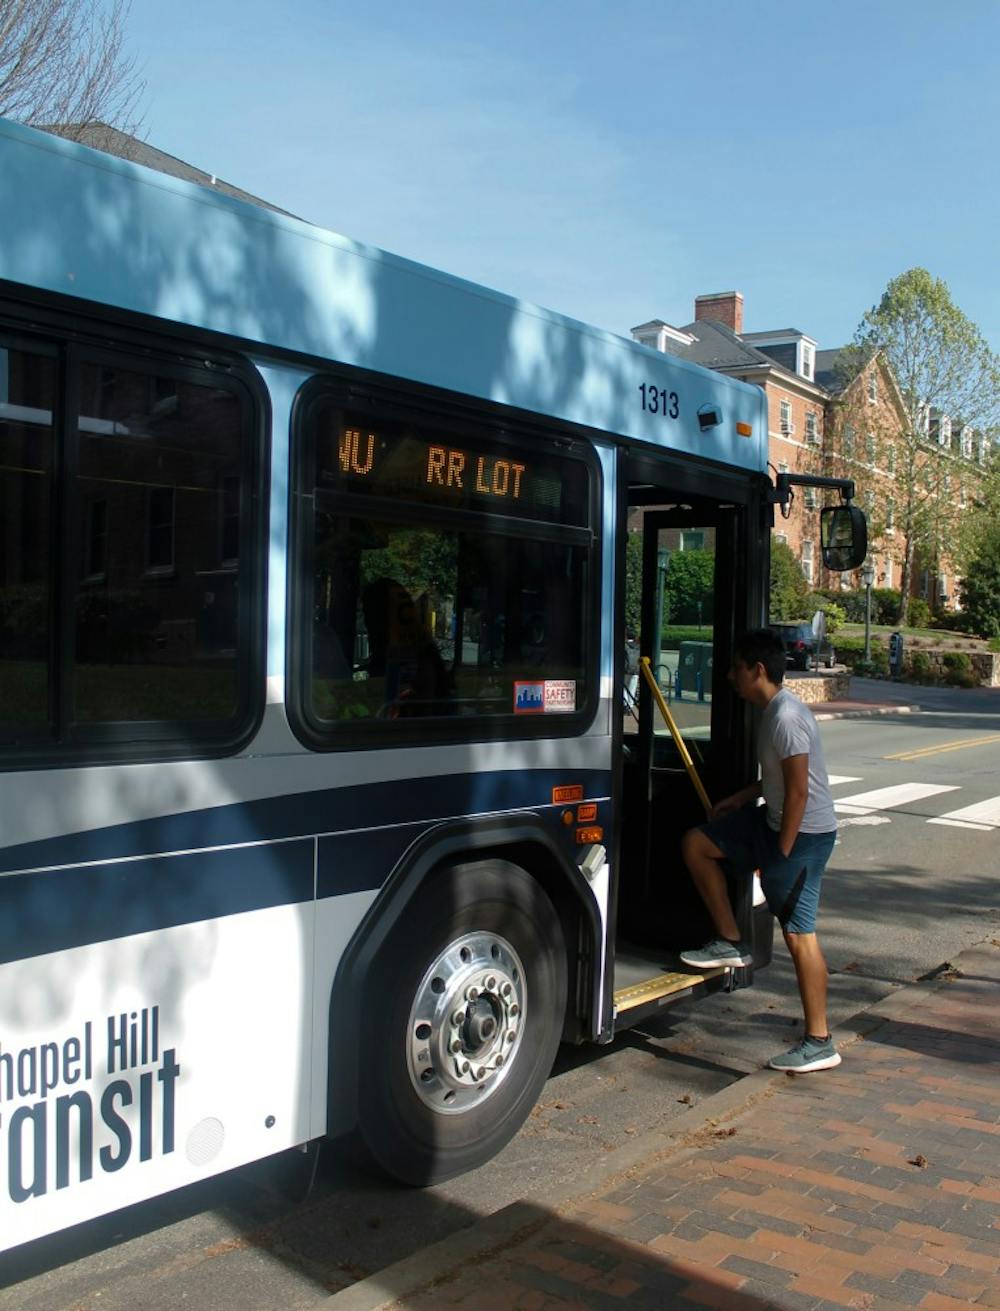 The North Carolina Department of Transportation made budget cuts to the State's Maintenance Assistance Program (SMAP), which the Chapel Hill Transit relies on, reducing more than 23% of payment to CHT in 2019. Resolution of the budget cuts is geared towards demonstrating the dependency of the community on the free transportation system.